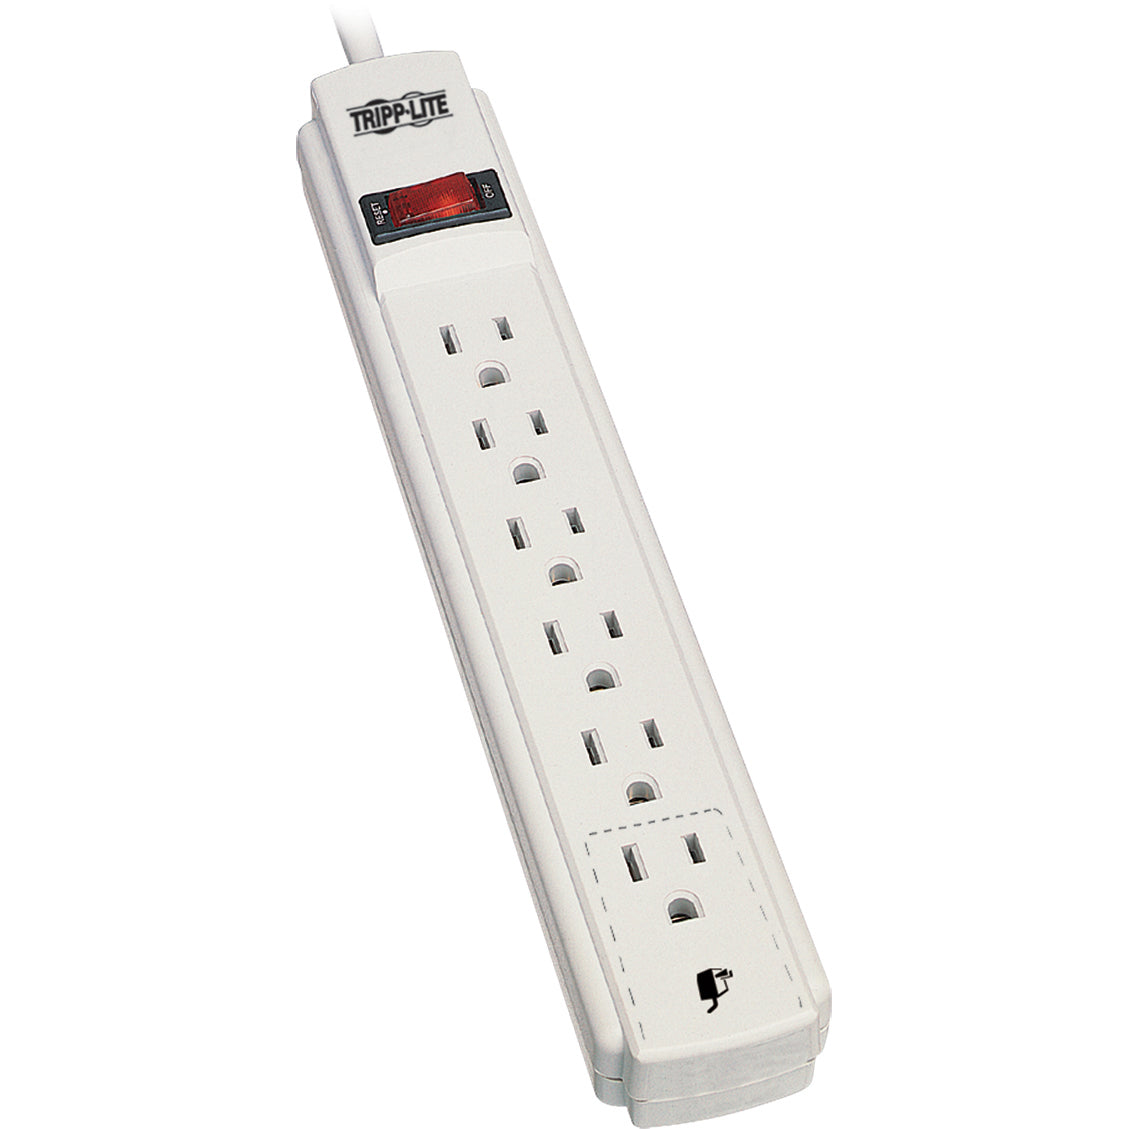 tripp-lite-by-eaton-power-it!-6-outlet-power-strip-15-ft-457-m-cord-nema-5-15p-6-x-nema-5-15r-15-ft-cord-15-a-current-120-v-ac-voltage-1875-w-wall-mountable-white_trpps615 - 2